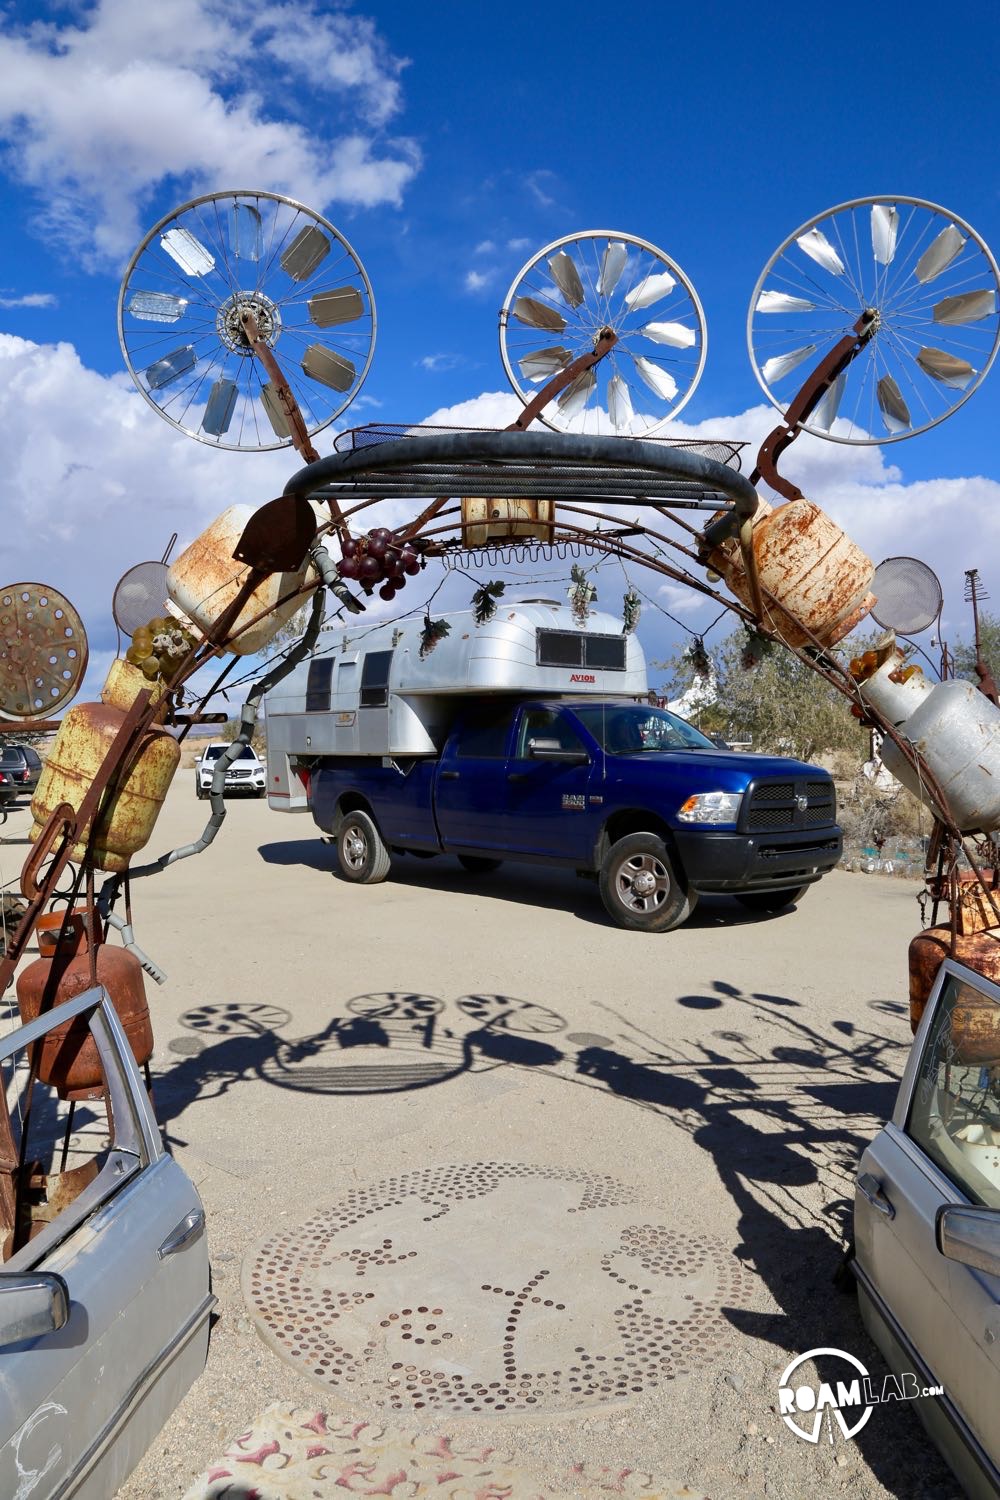 Untitled (Entry Archway) by Charlie Russell and Royce Carlson on display in East Jesus, Slab City